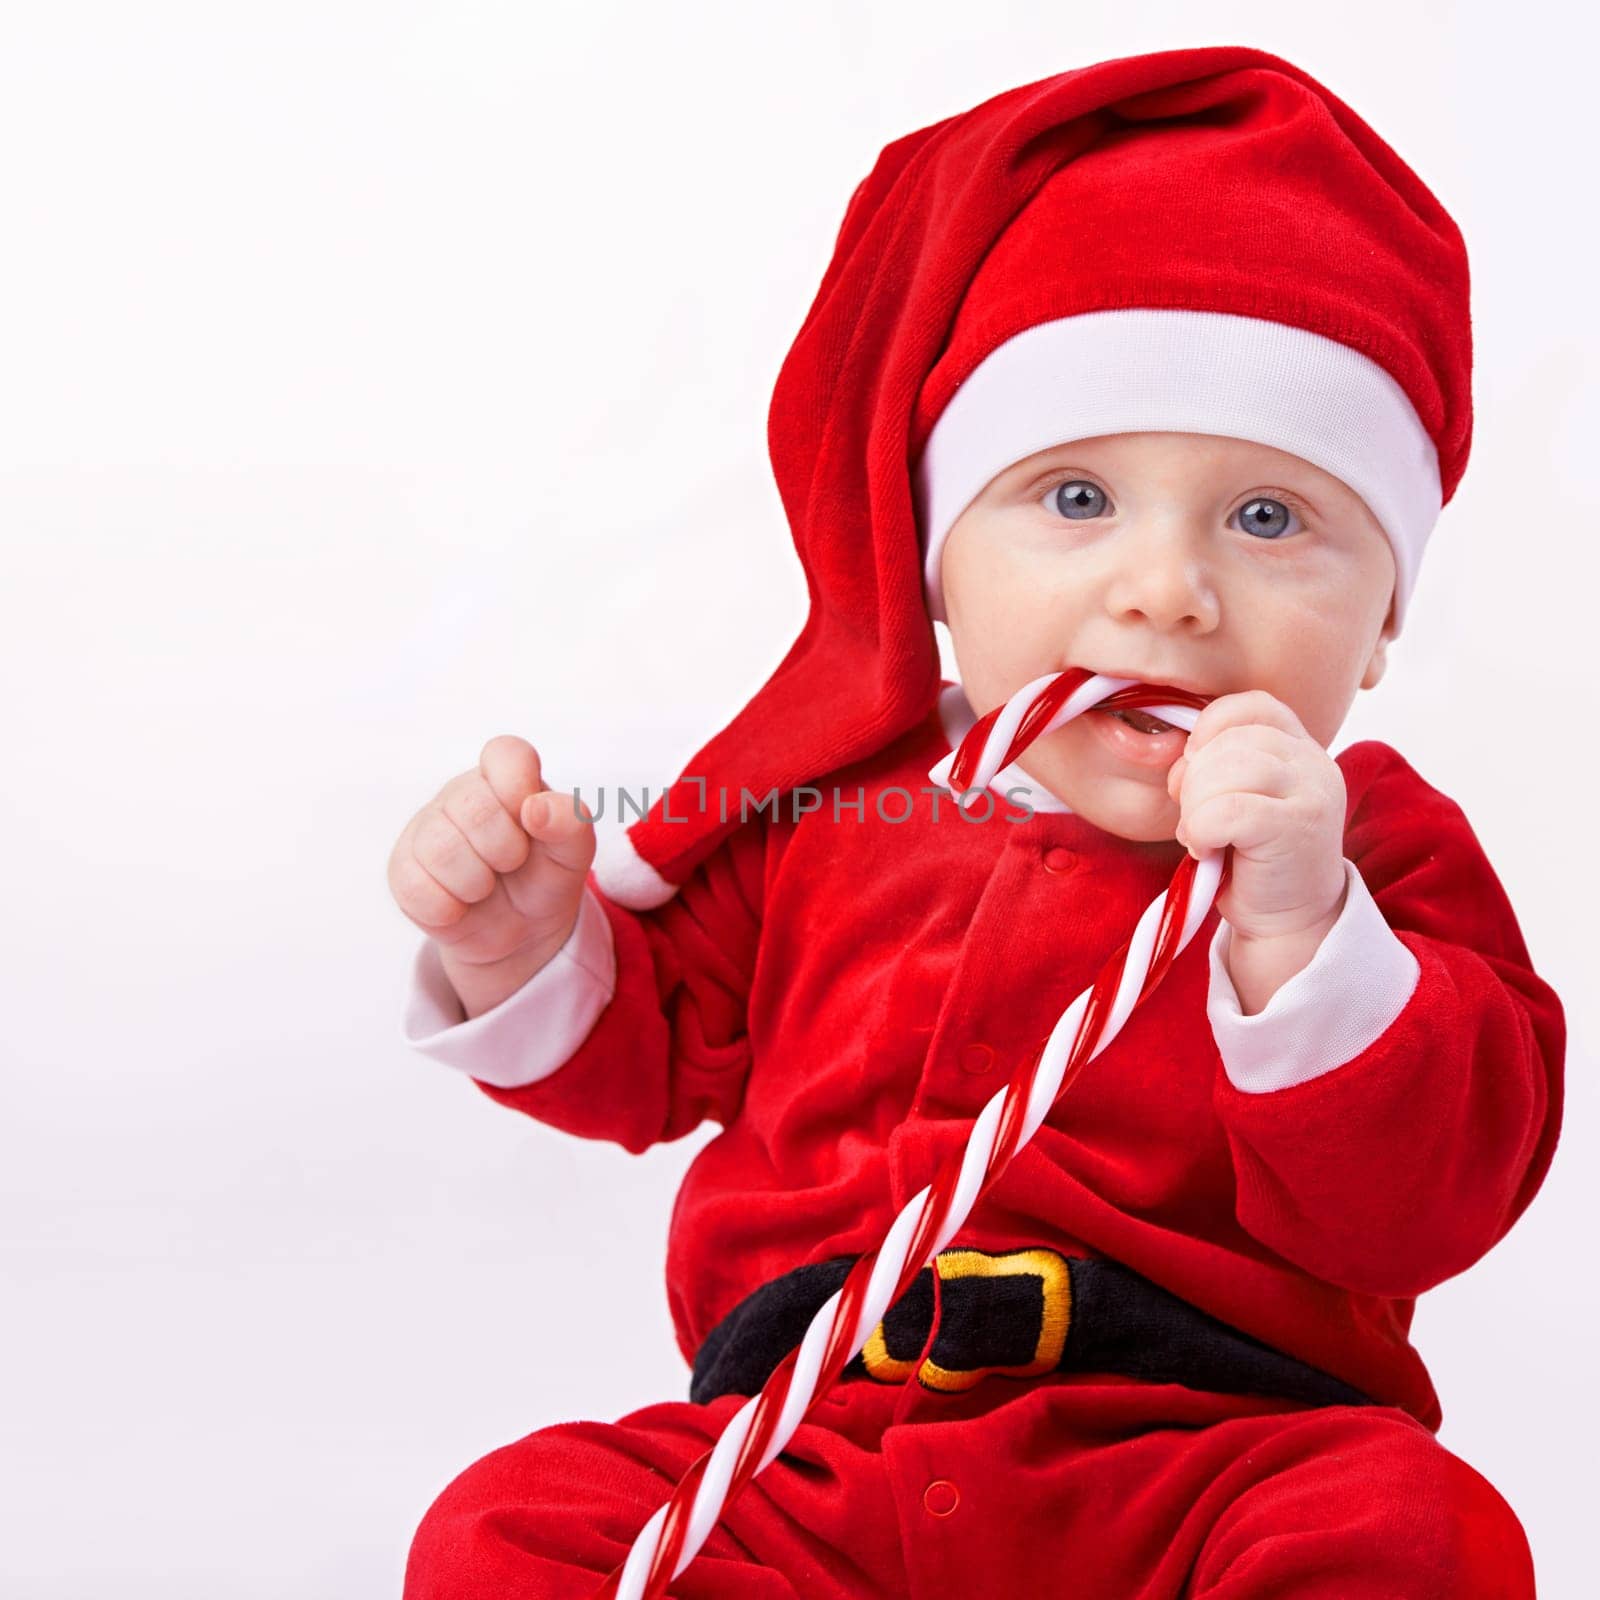 Baby, portrait and studio with santa costume for first Christmas holiday, candy cane and white background. Boy toddler, xmas and outfit for festive season or celebration, innocent and adorable in hat by YuriArcurs